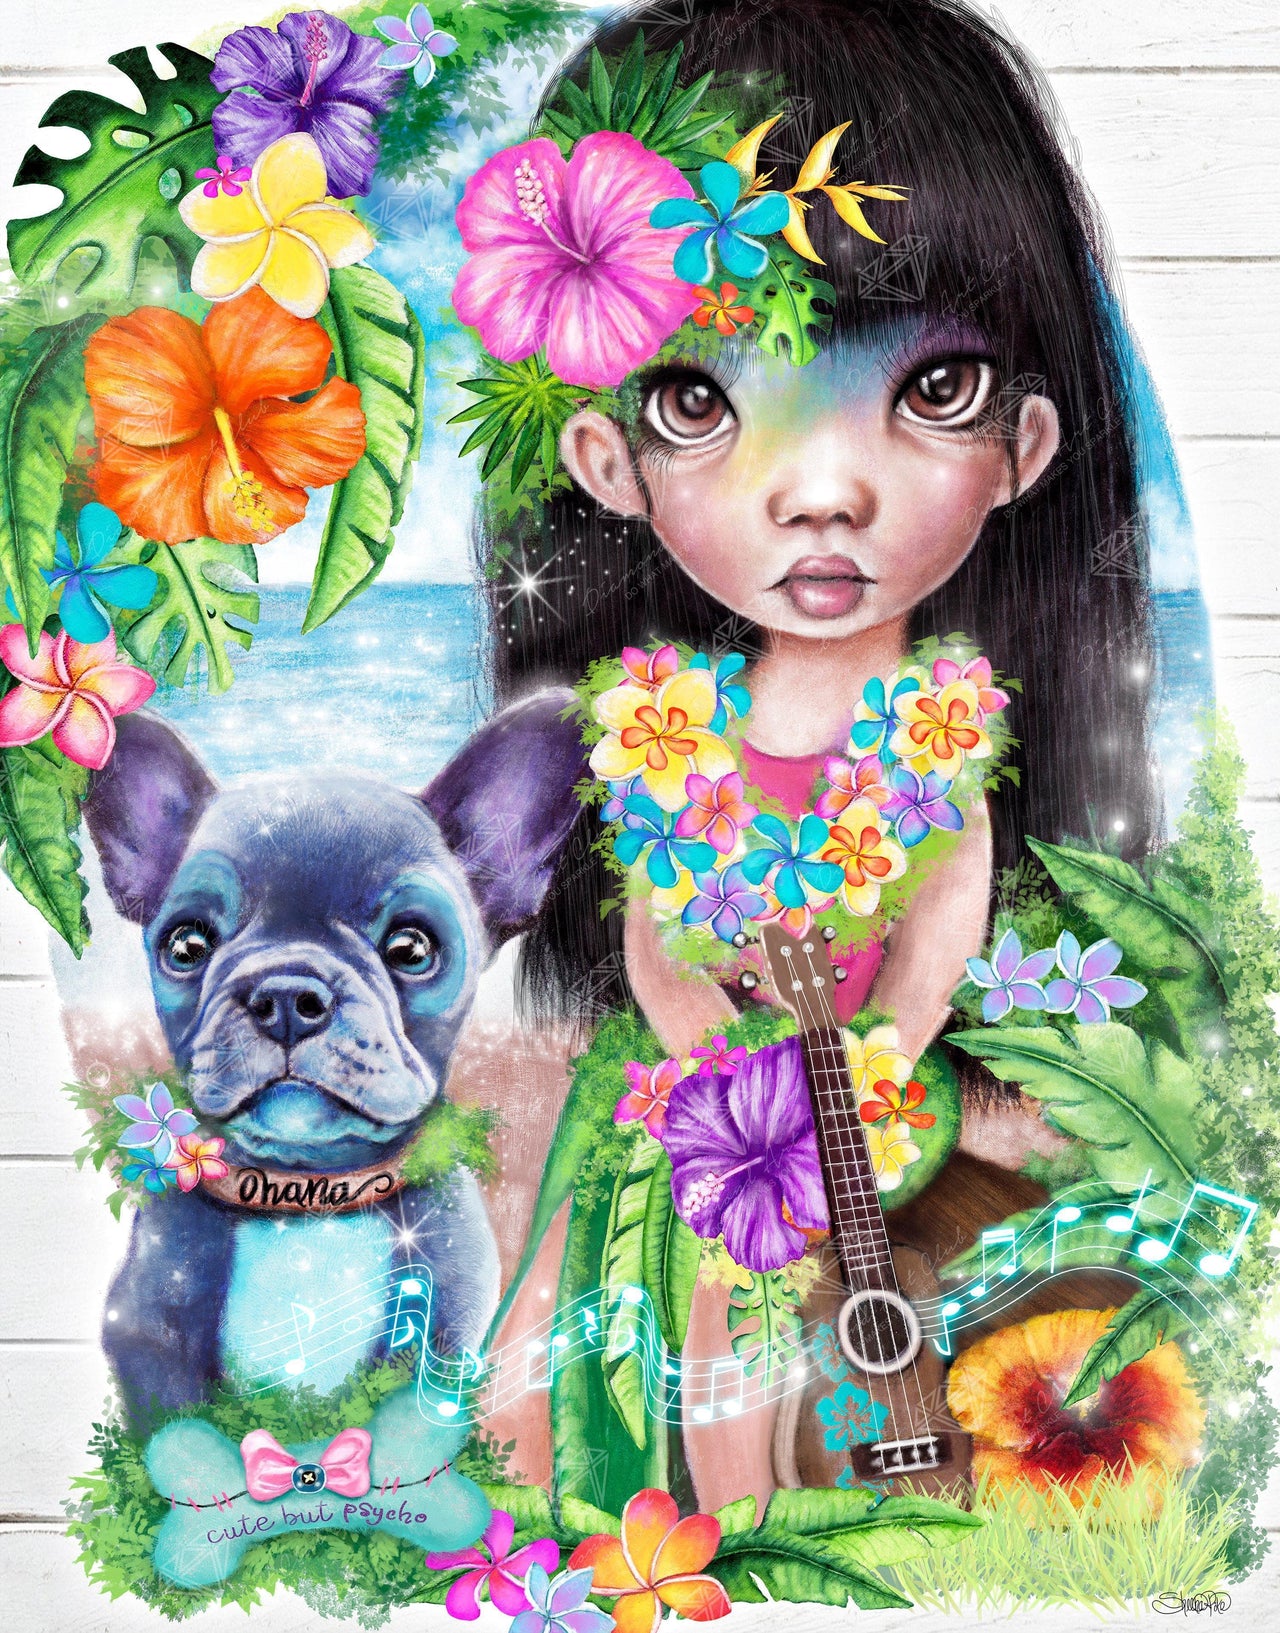 Diamond Painting A Hawaiian Girl And Her Dog 22" x 28″ (56cm x 71cm) / Square with 63 Colors including 3 ABs / 62,322